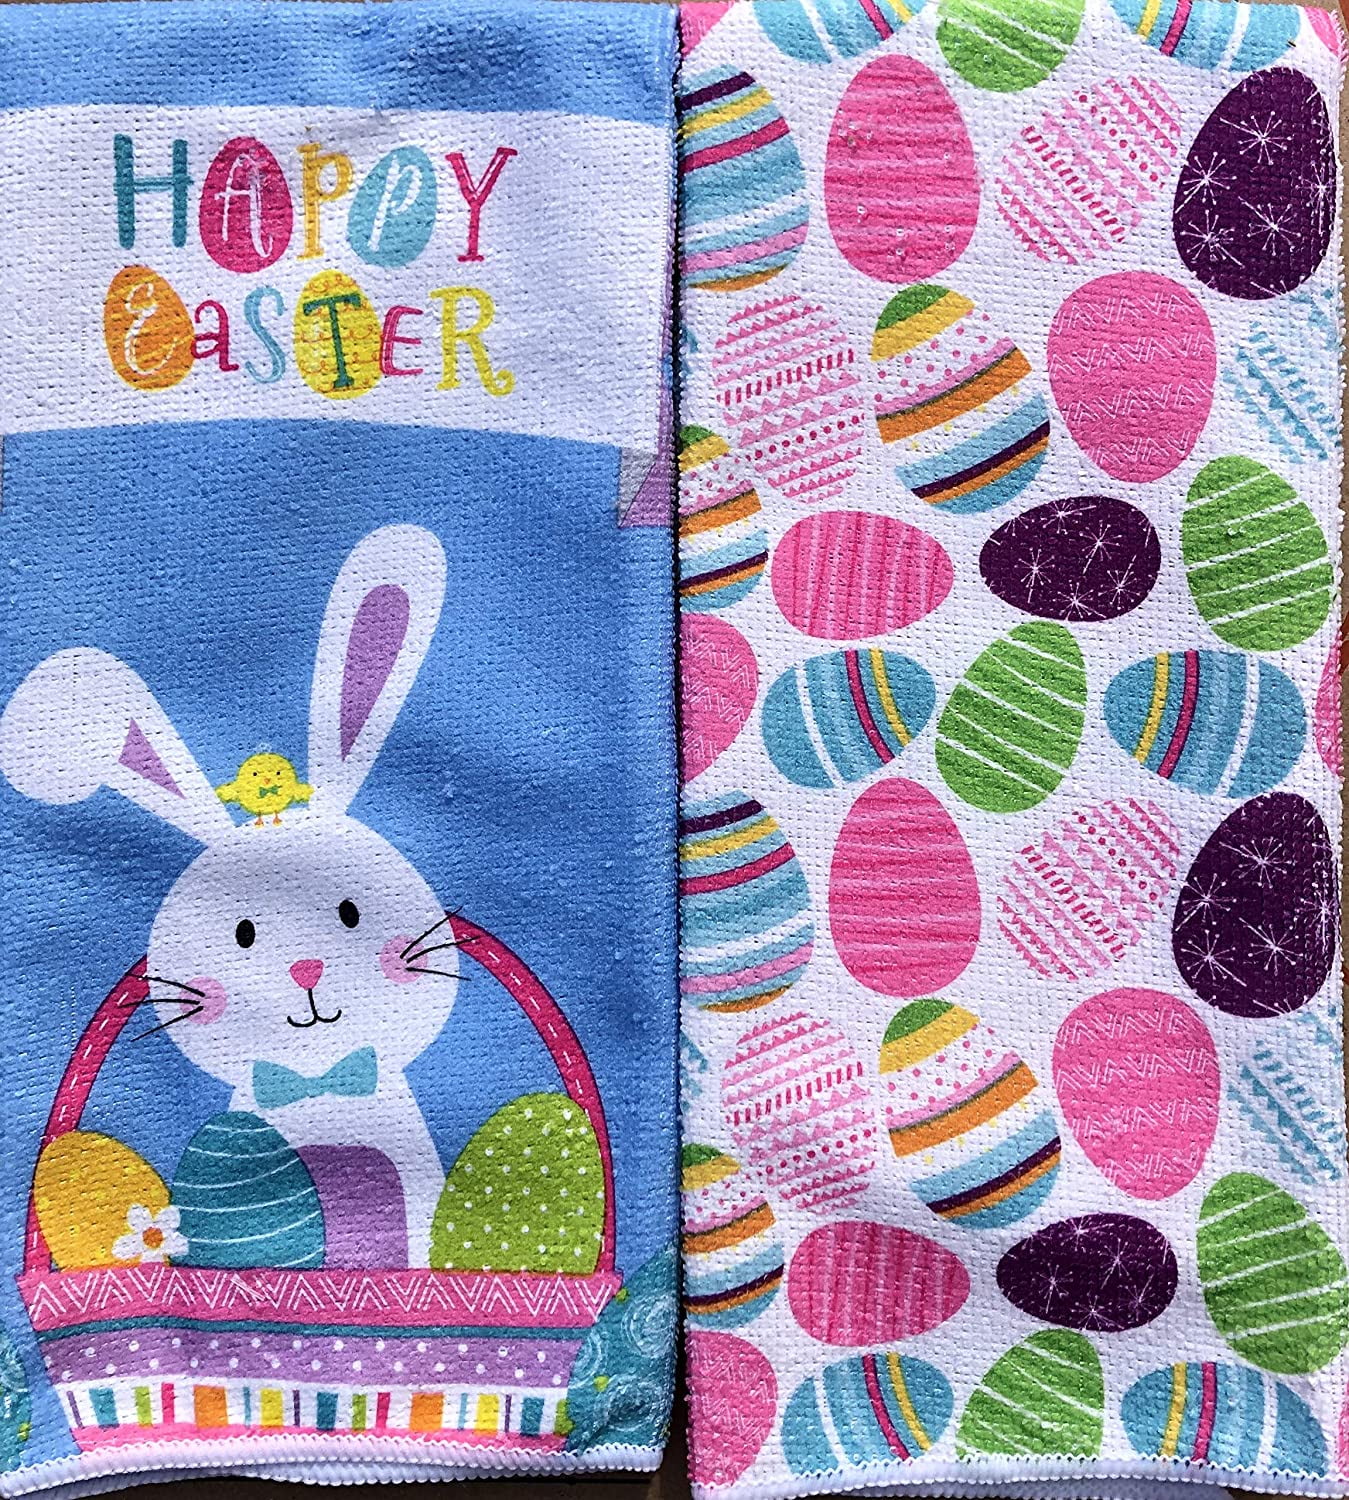 15"x25" GR BUNNY'S FACE,HAPPY EASTER 2 SAME PRINTED MICROFIBER KITCHEN TOWELS 